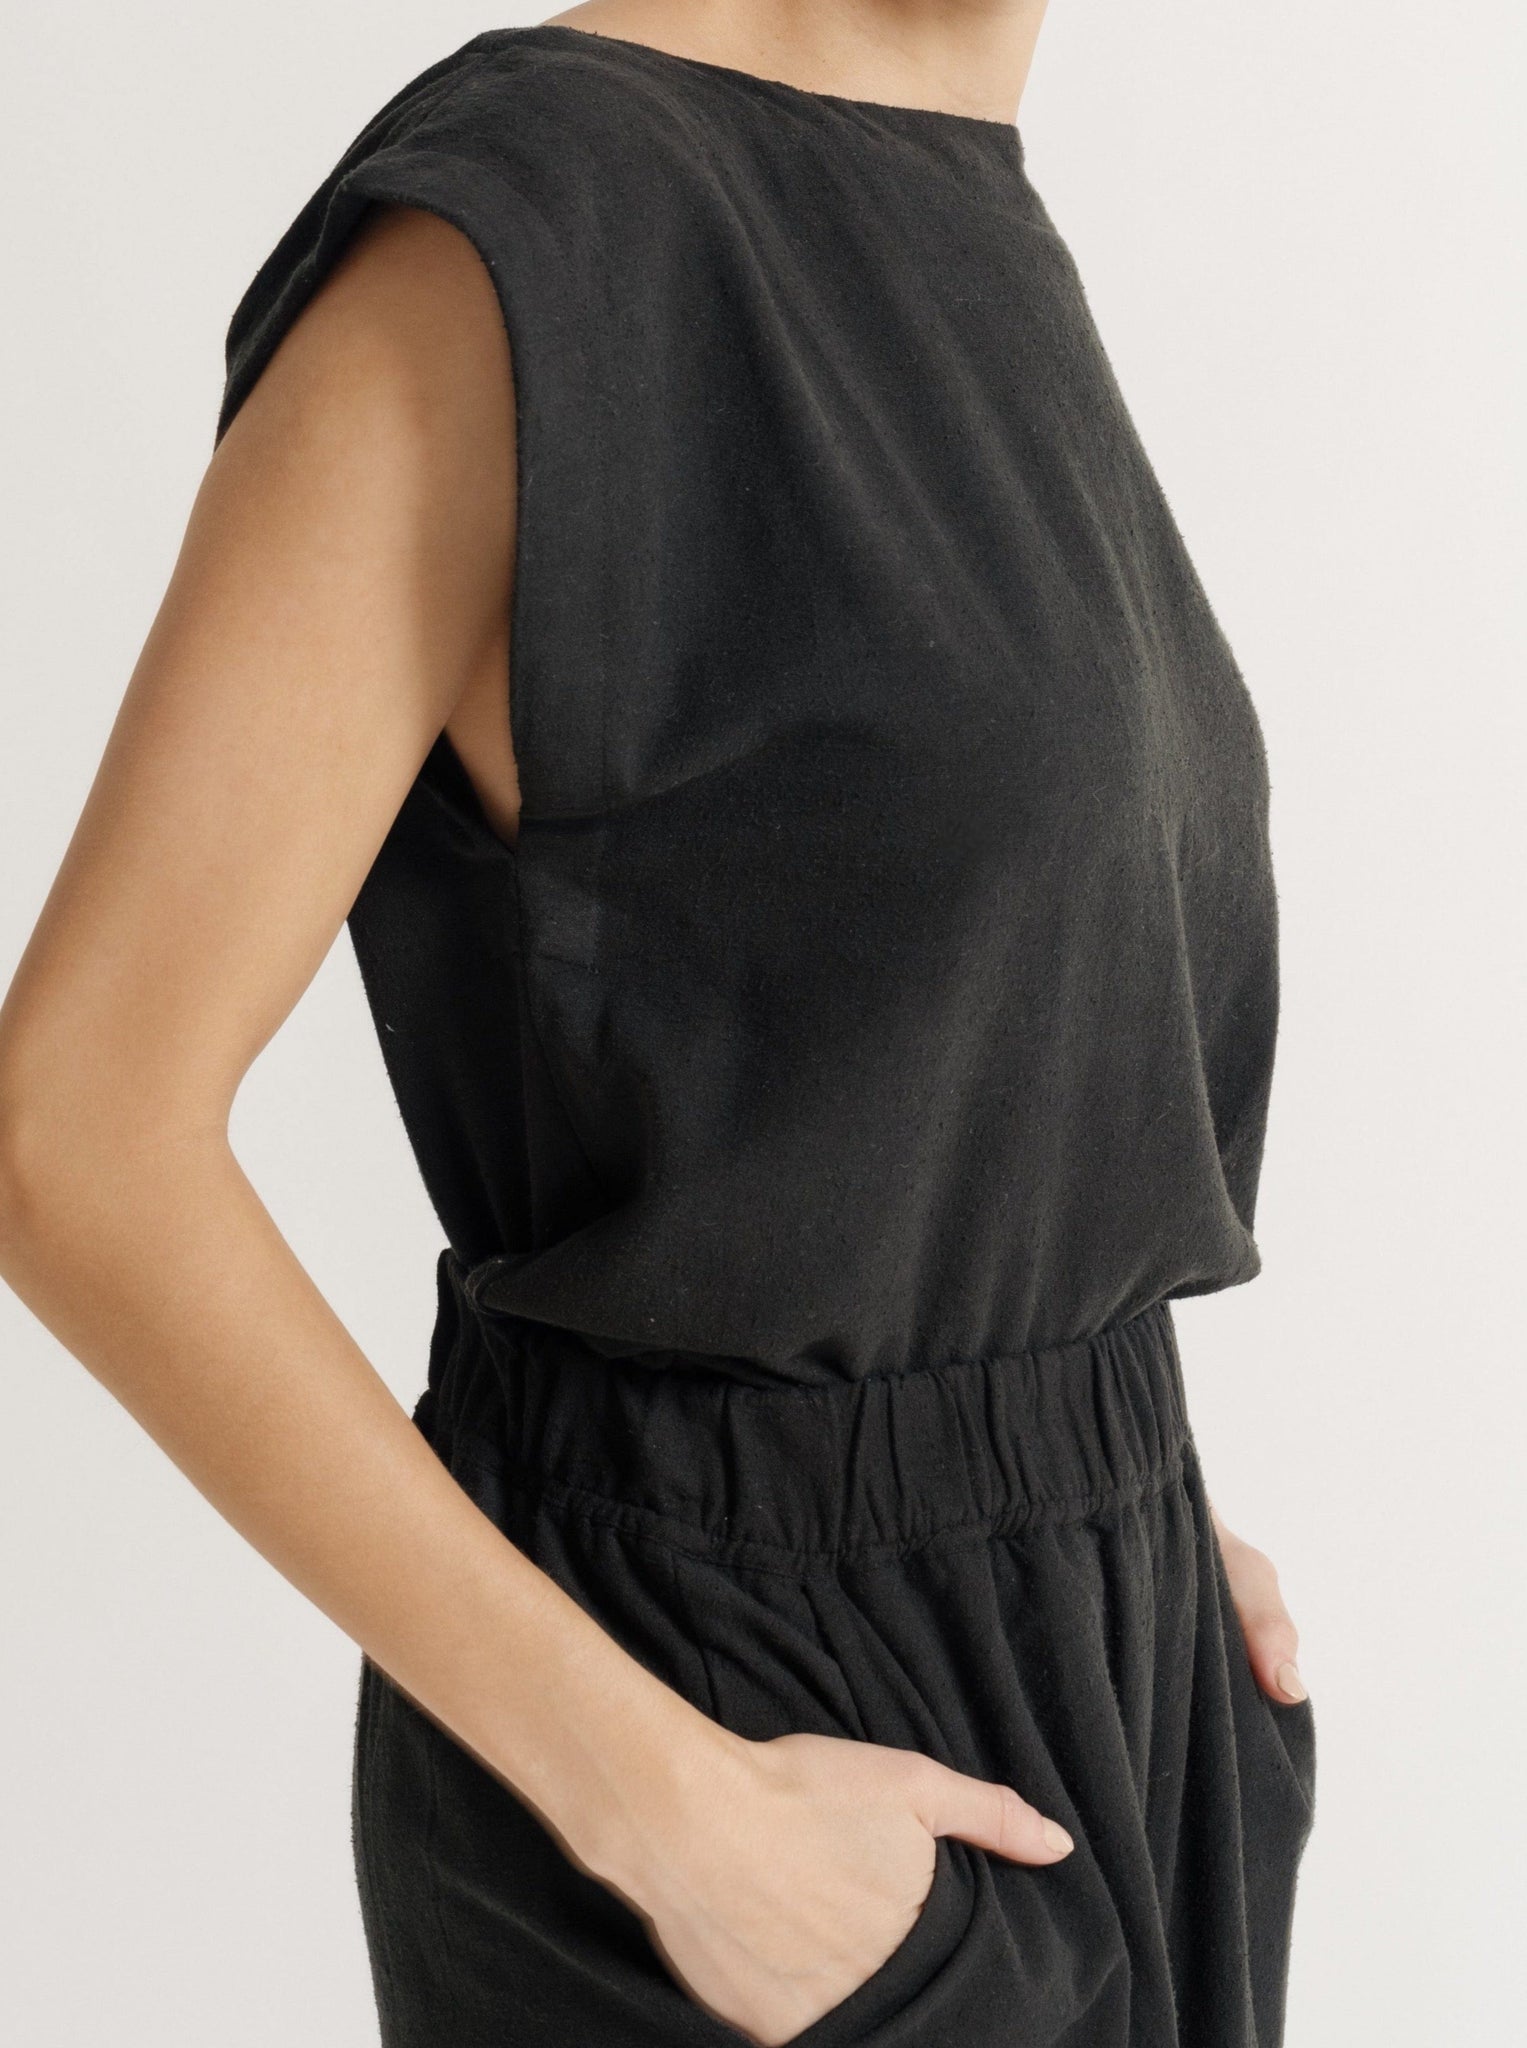 The model is wearing a sustainable Everyday Top - Black Silk Noil jumpsuit with pockets, crafted from textured silk noil.